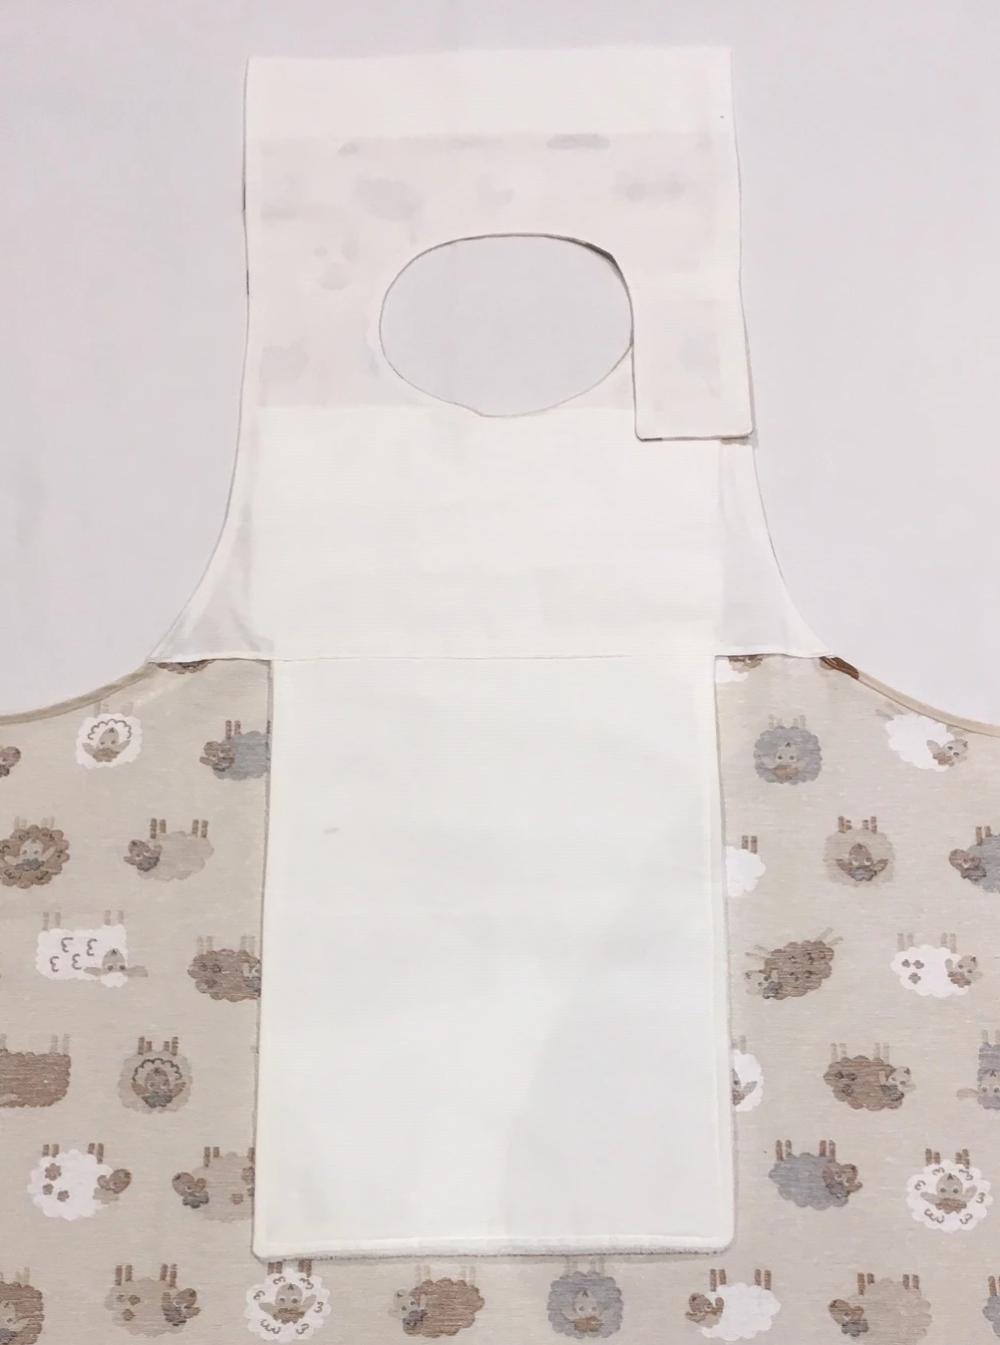 REverse of Sheep design dining drArpron® showing three layers of protection